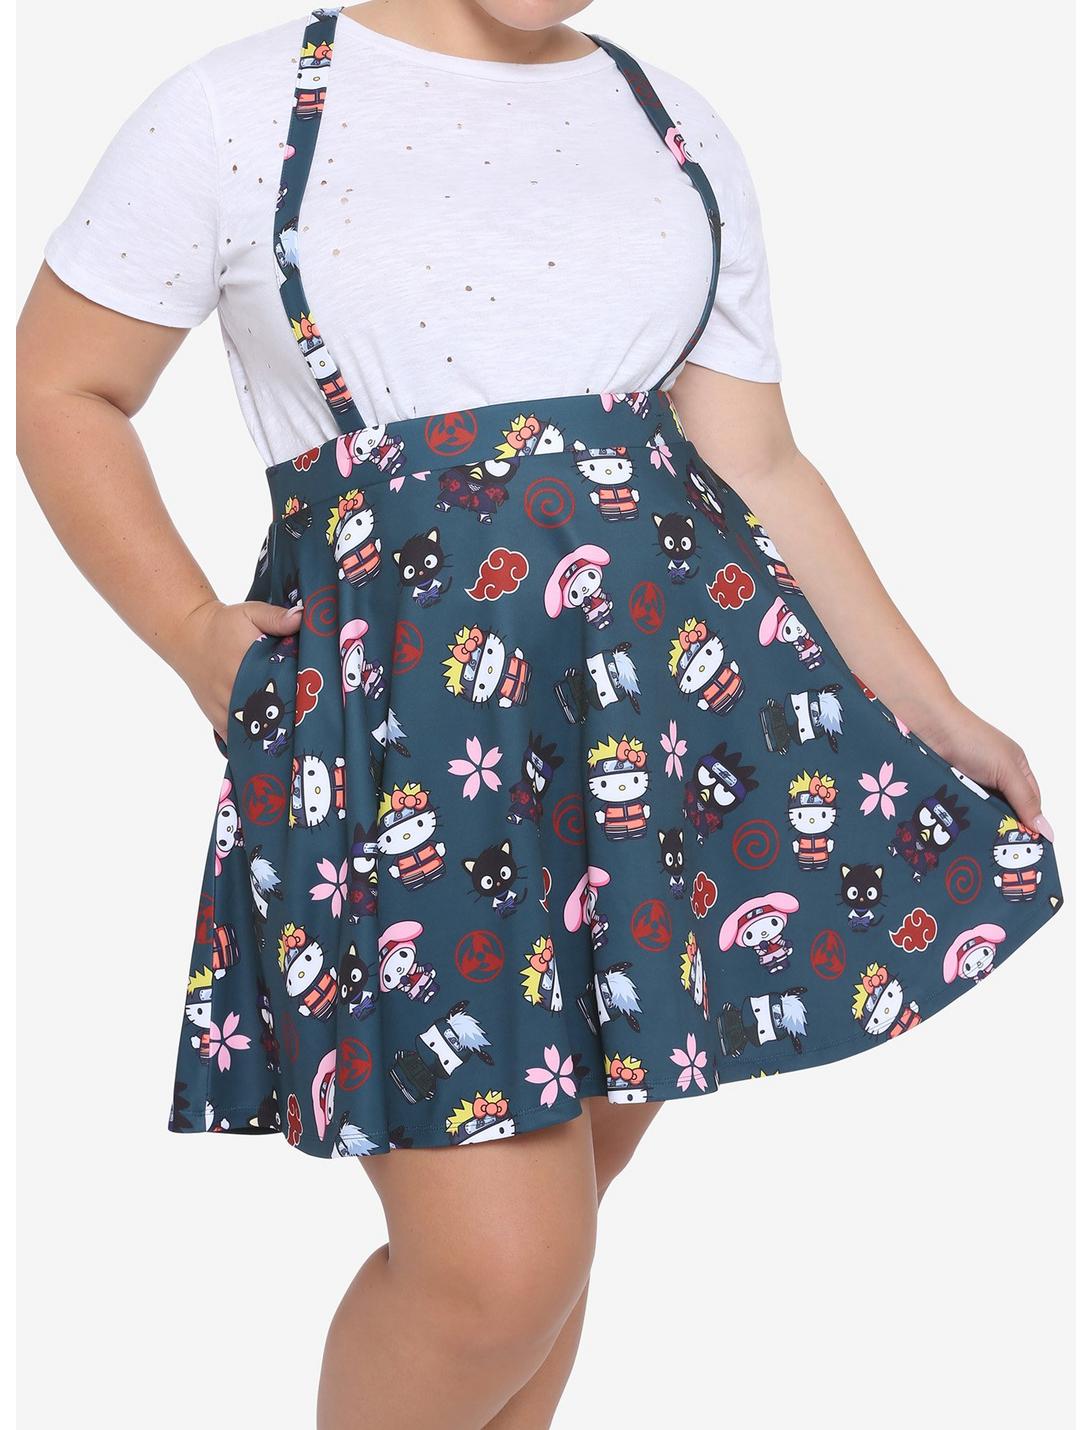 Naruto Shippuden X Hello Kitty And Friends Group Suspender Skirt Plus Size, BLACK, hi-res